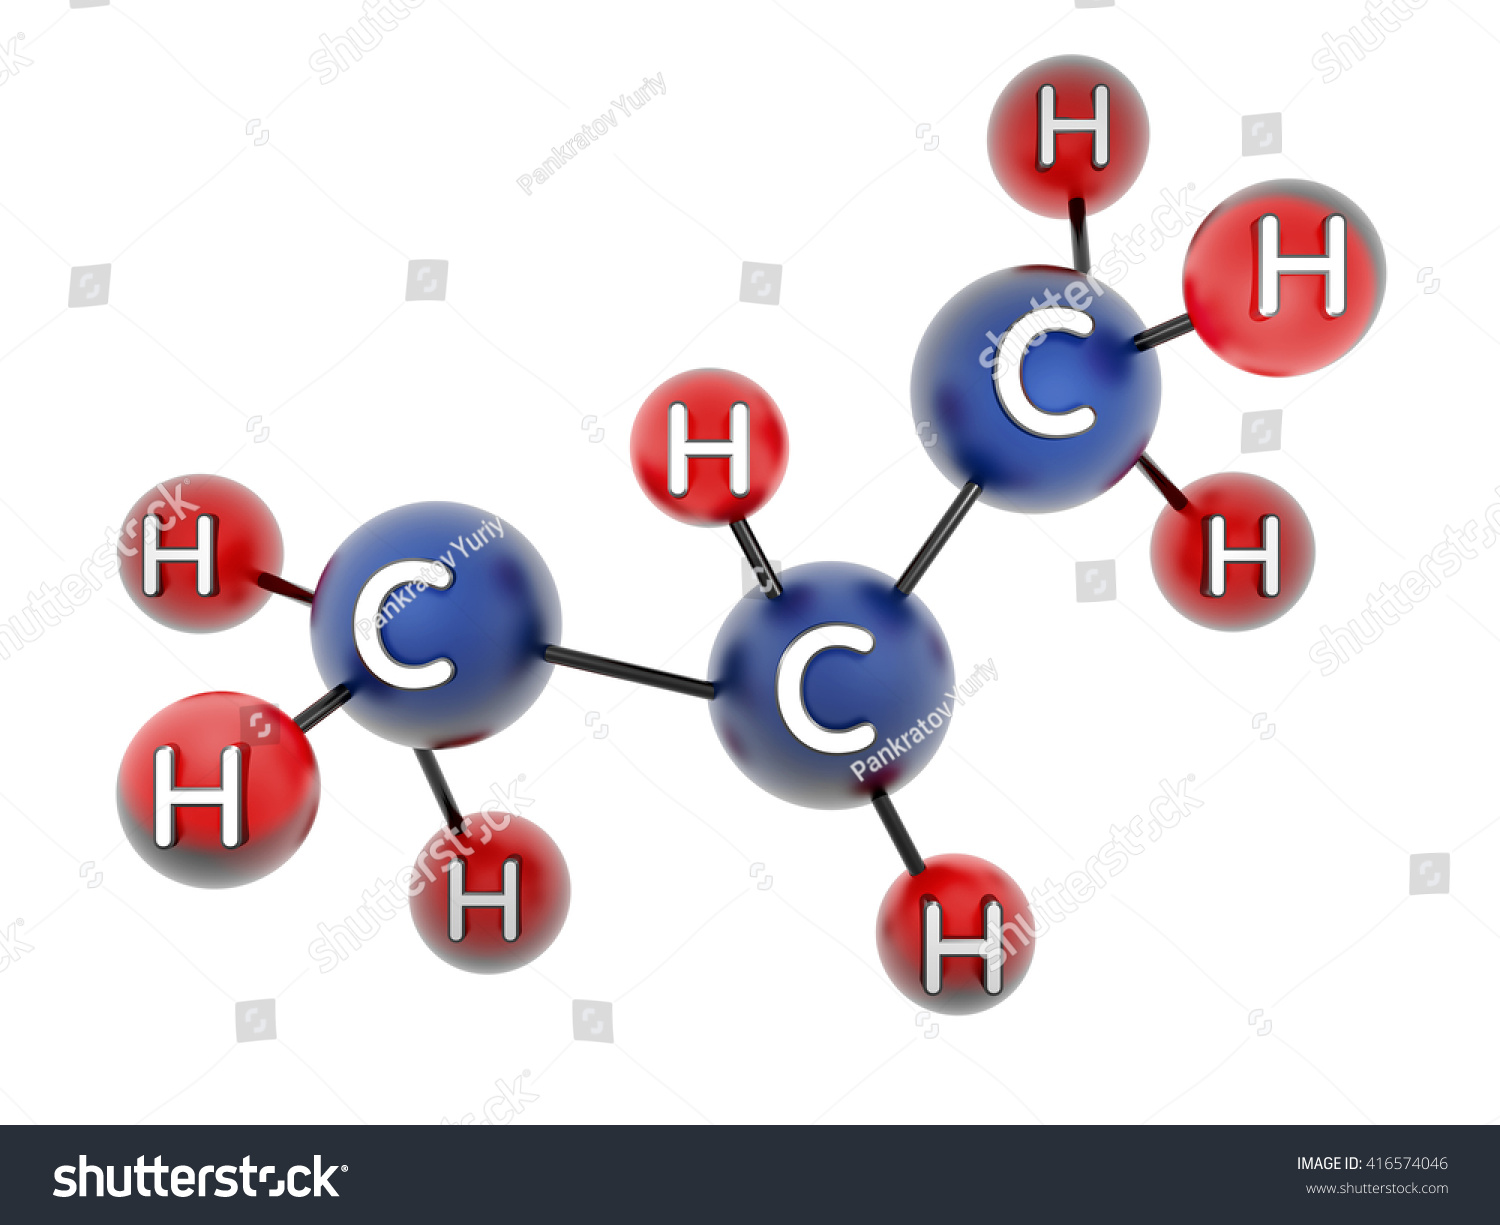 C3h8. Propane. Gas. 3d Model. Isolated On White. Stock Photo 416574046 ...